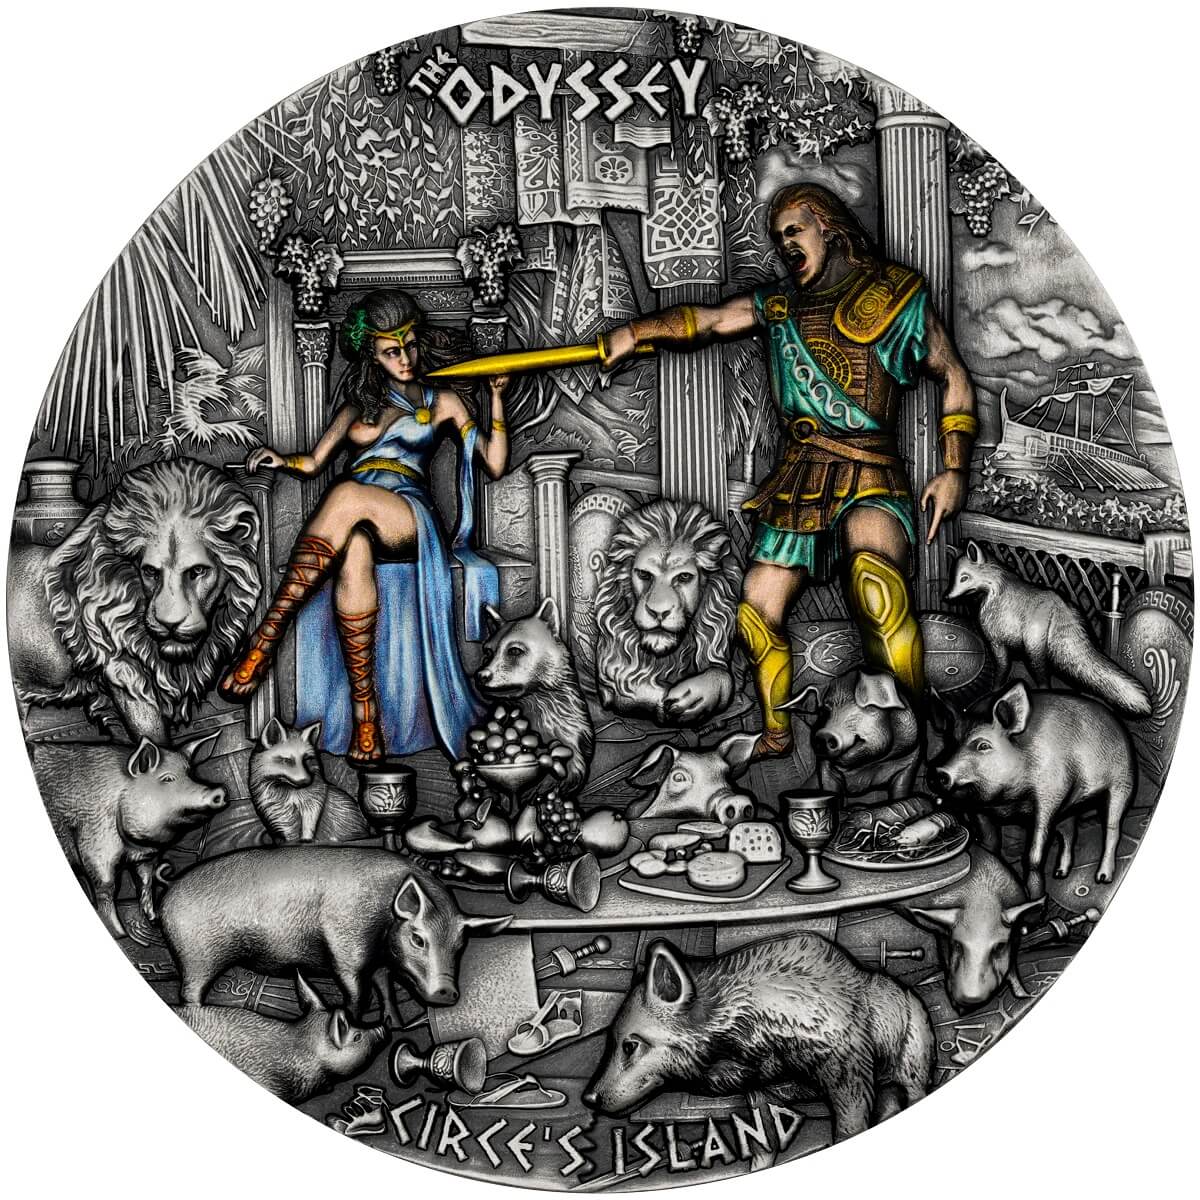 A detailed illustration depicting scenes and characters from the 2023 Niue Odyssey Circe’s Island 3oz Silver Antiqued Coin, with an emphasis on the tale of Circe's island.